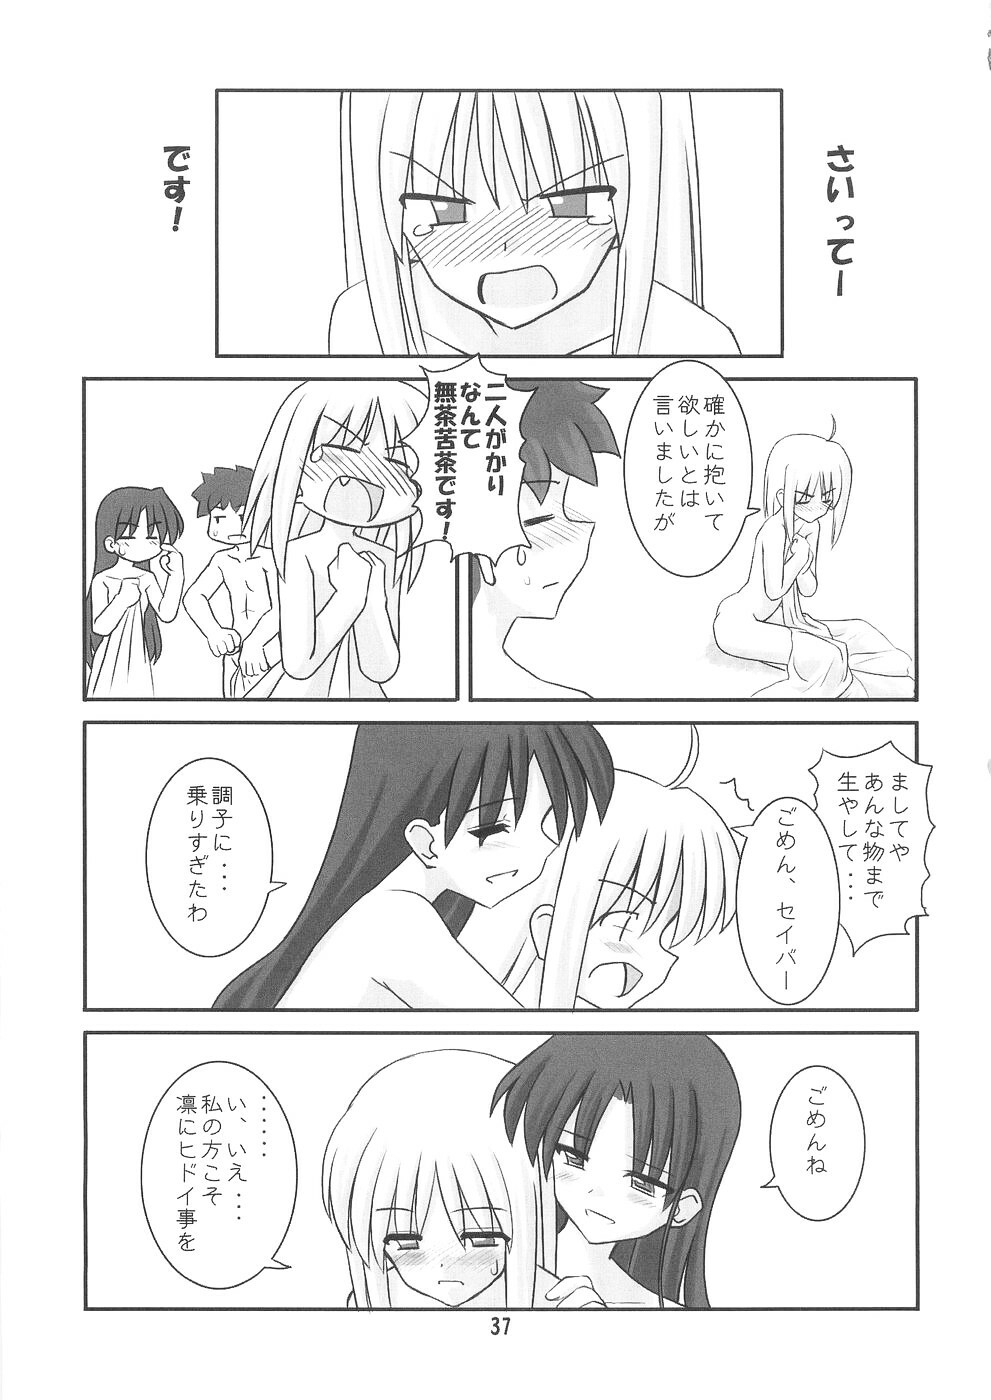 (CR35) [RUBBISH Selecting Squad (Namonashi)] Moon Marguerite (Fate/stay night) page 36 full